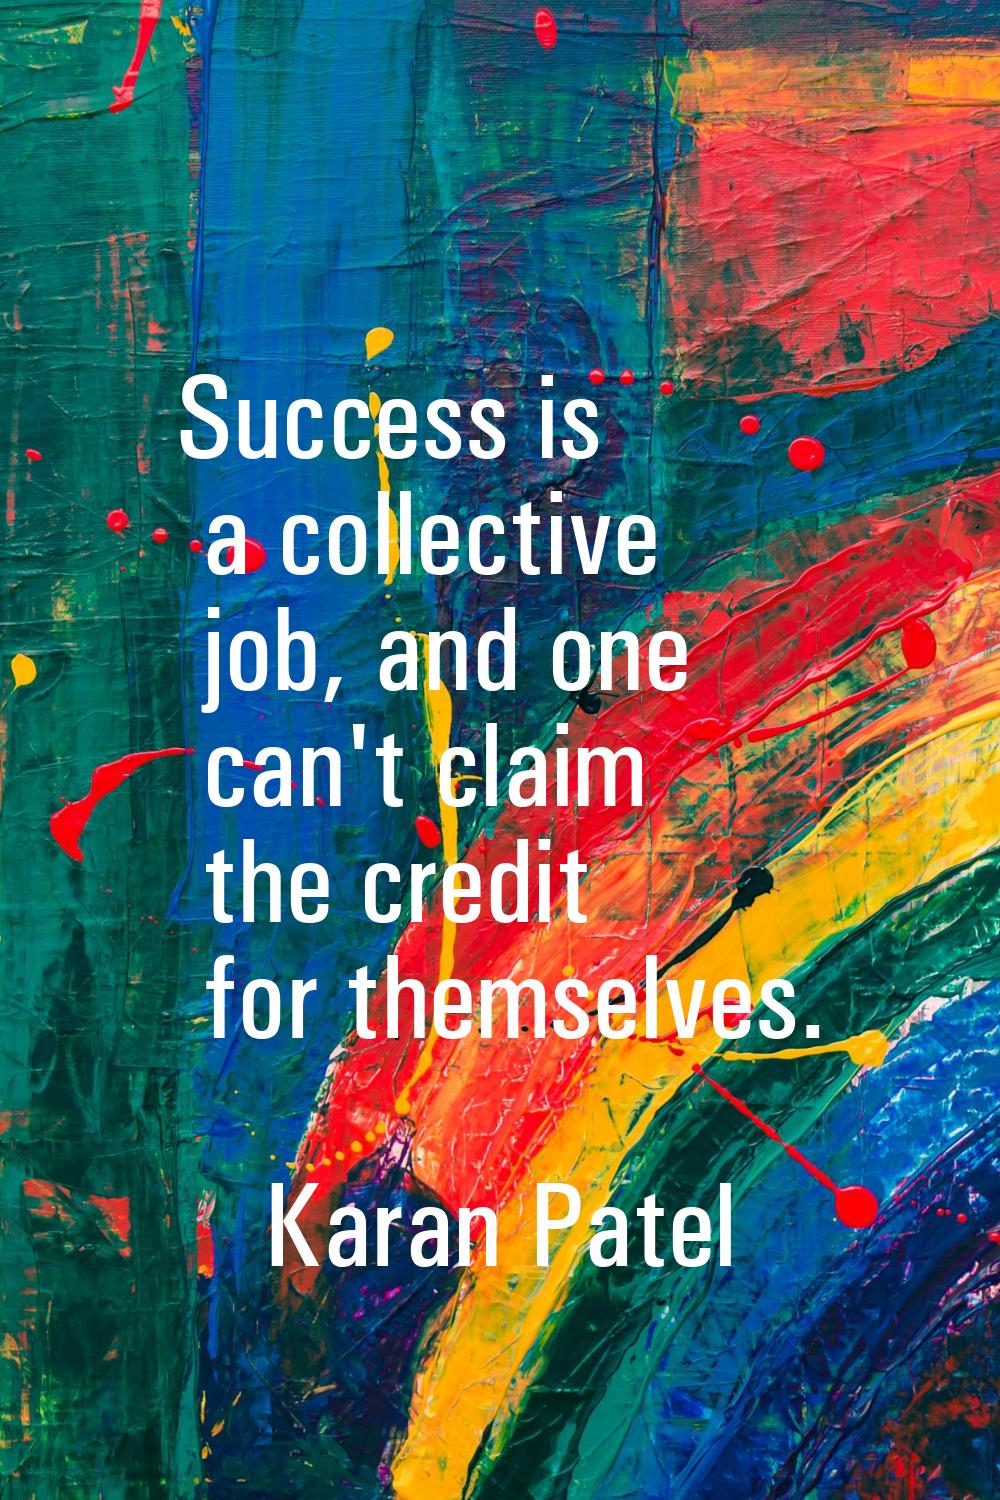 Success is a collective job, and one can't claim the credit for themselves.